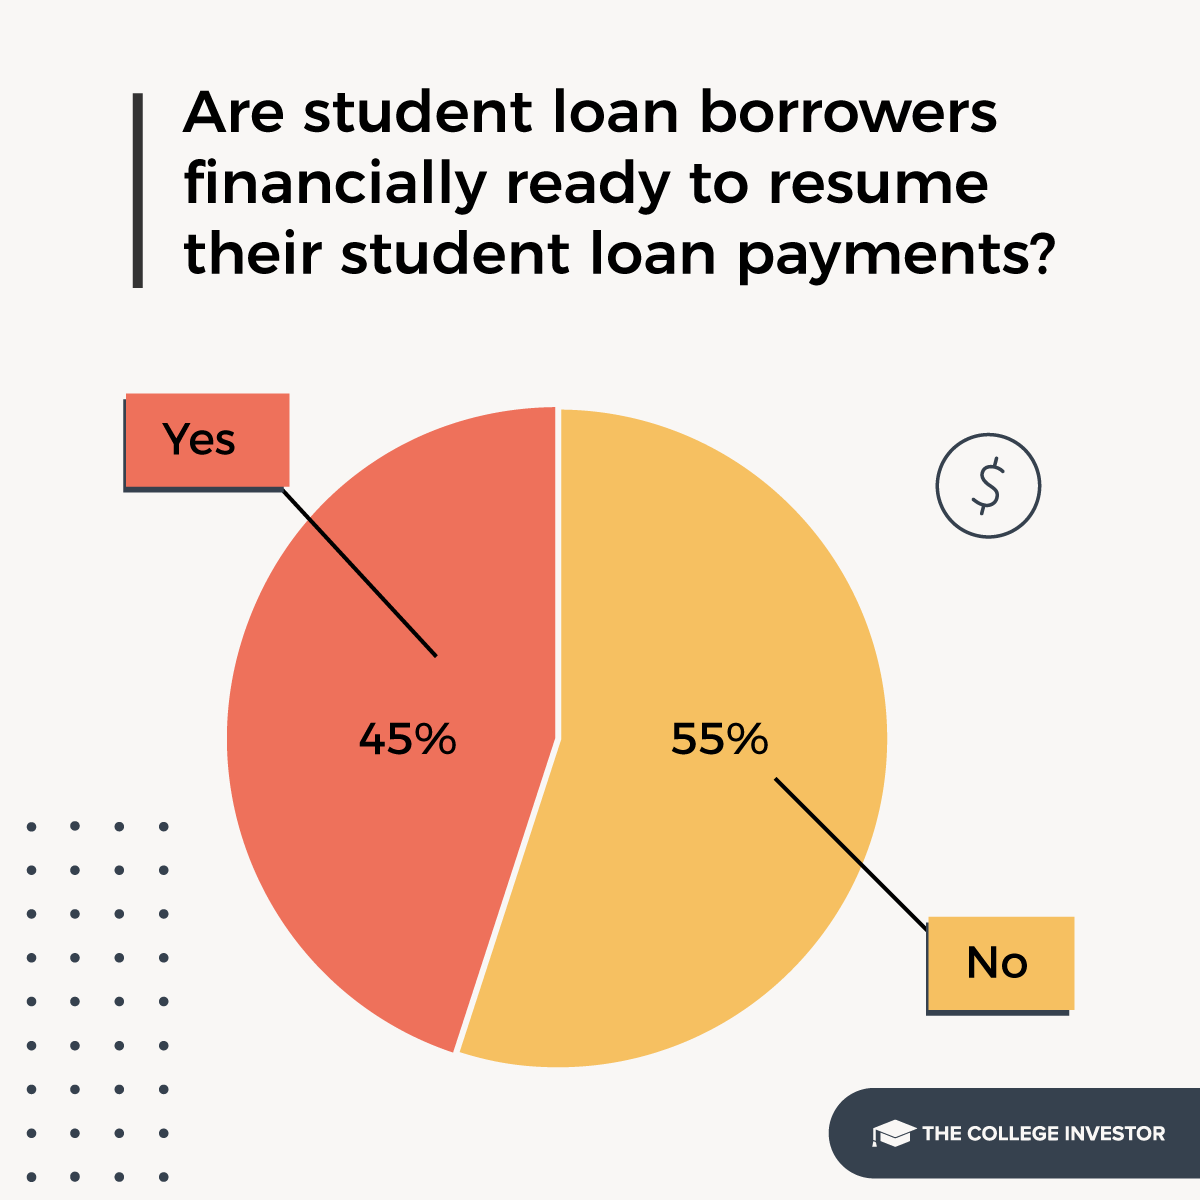 55% of student loan borrowers are not financially ready to resume payments